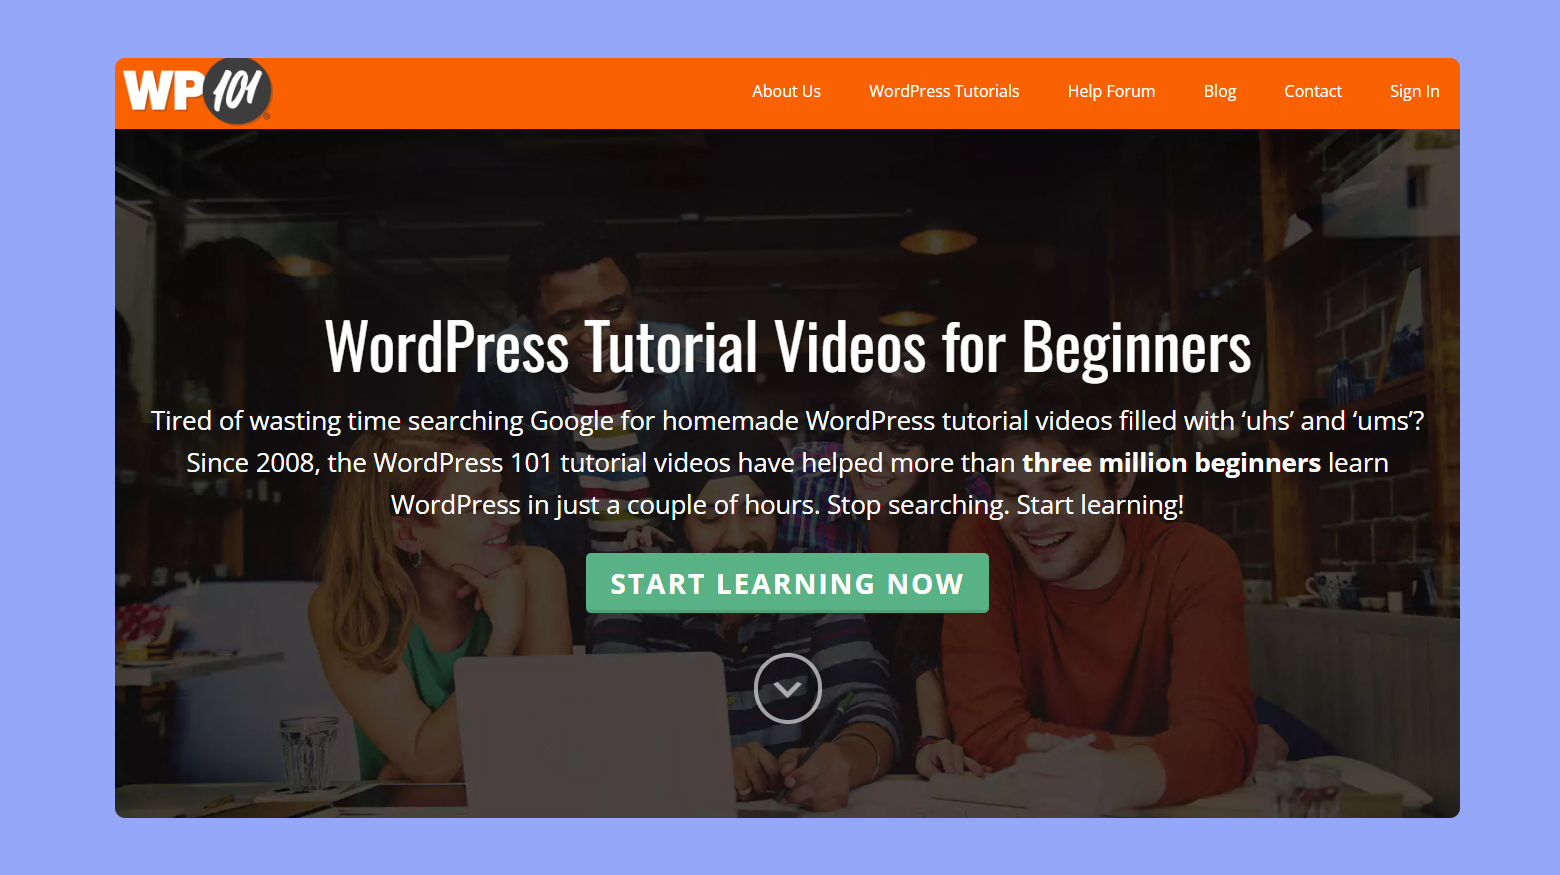 WP101 for learning WordPress